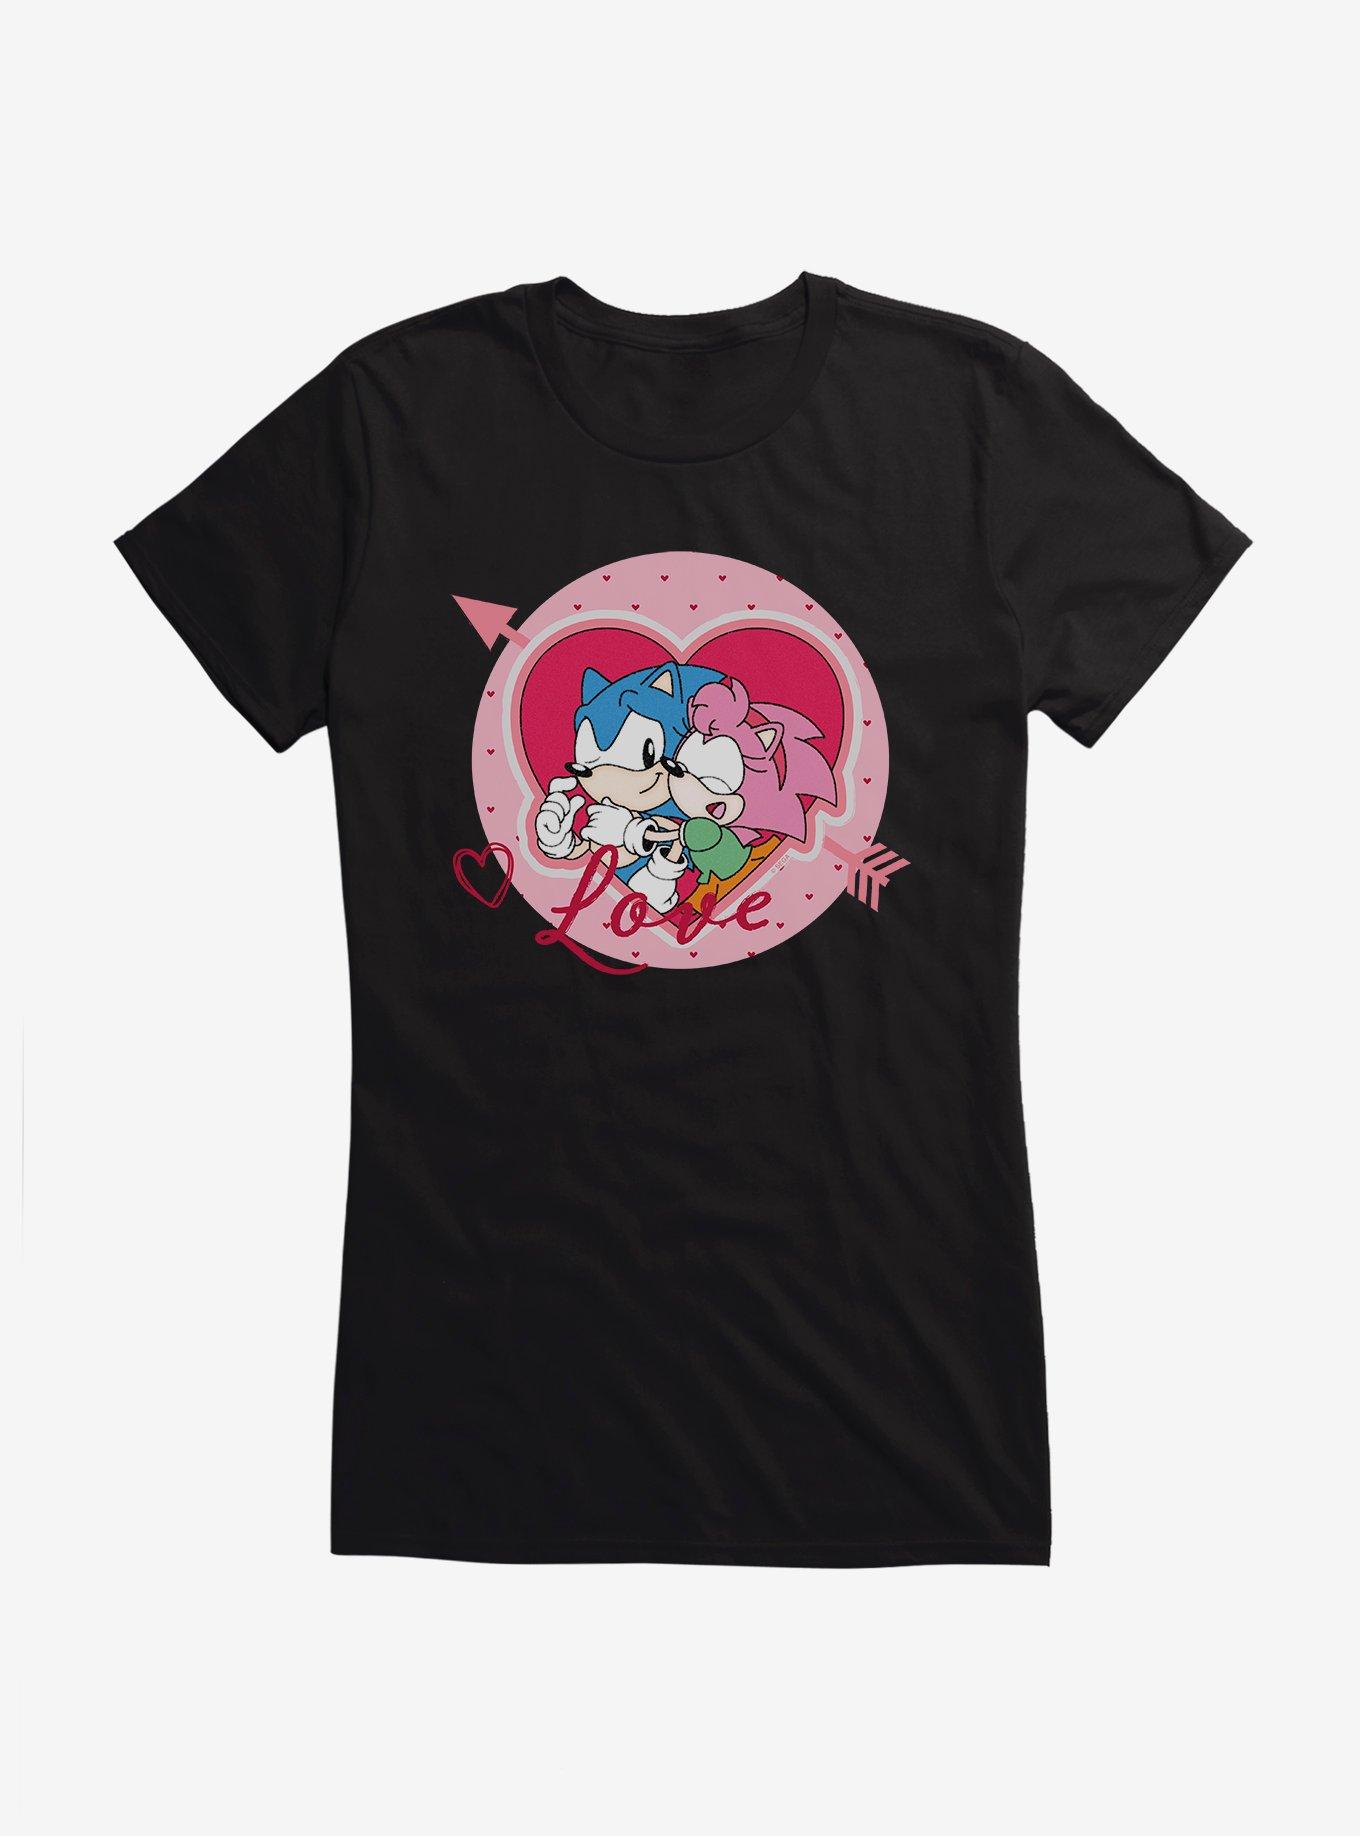 SonAmy Sonic The Hedgehog and Amy Rose in Love :), Sonamy